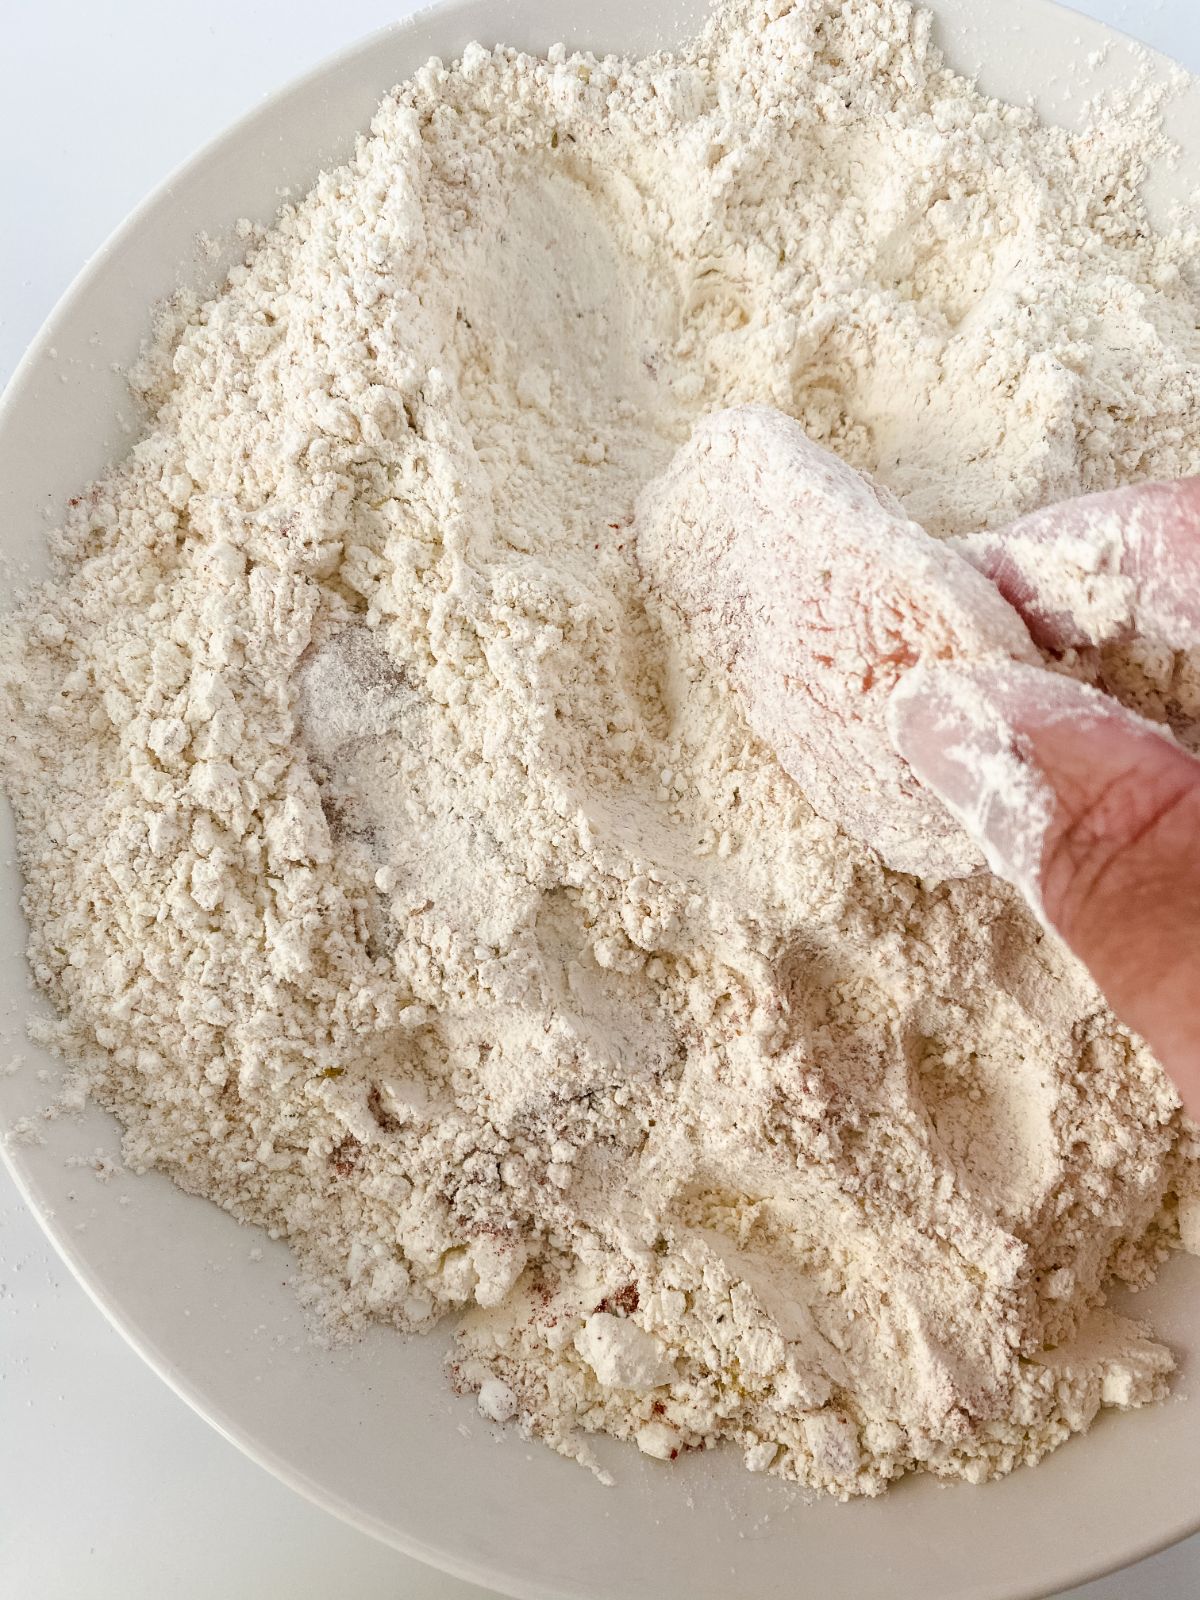 chicken being dipped into seasoned flour